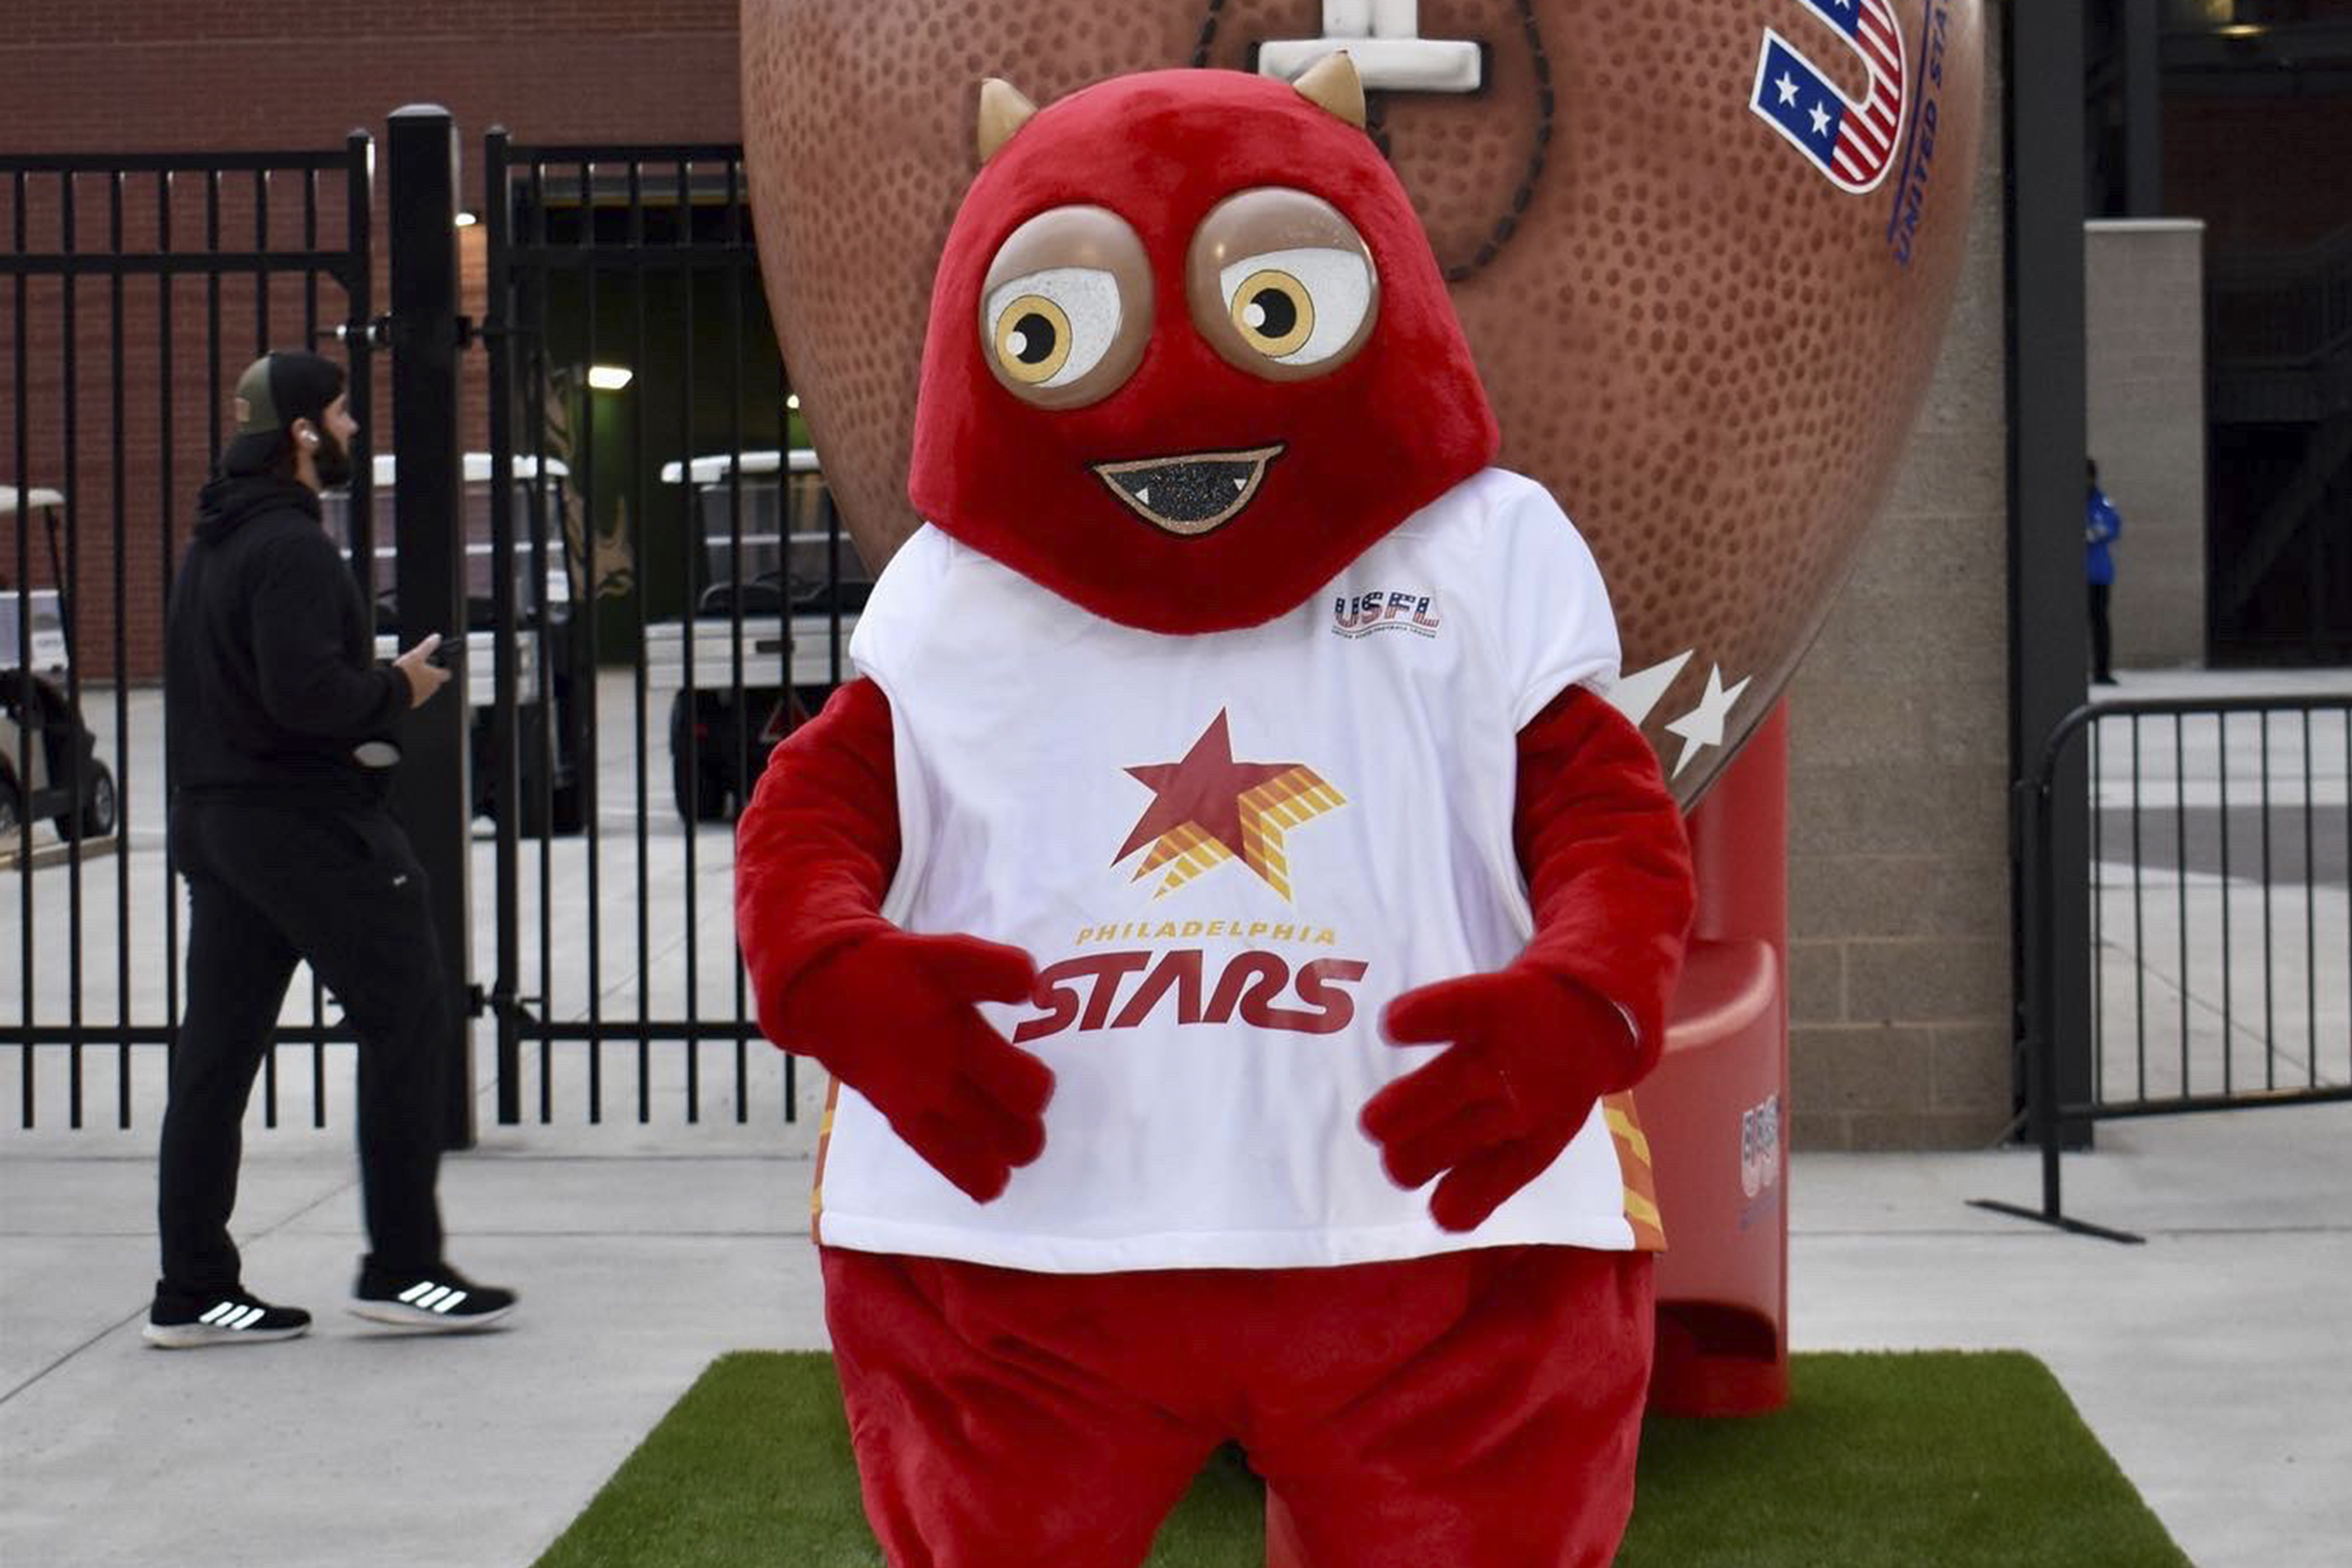 The Strangest One Of All: On the Topic Of Mascots